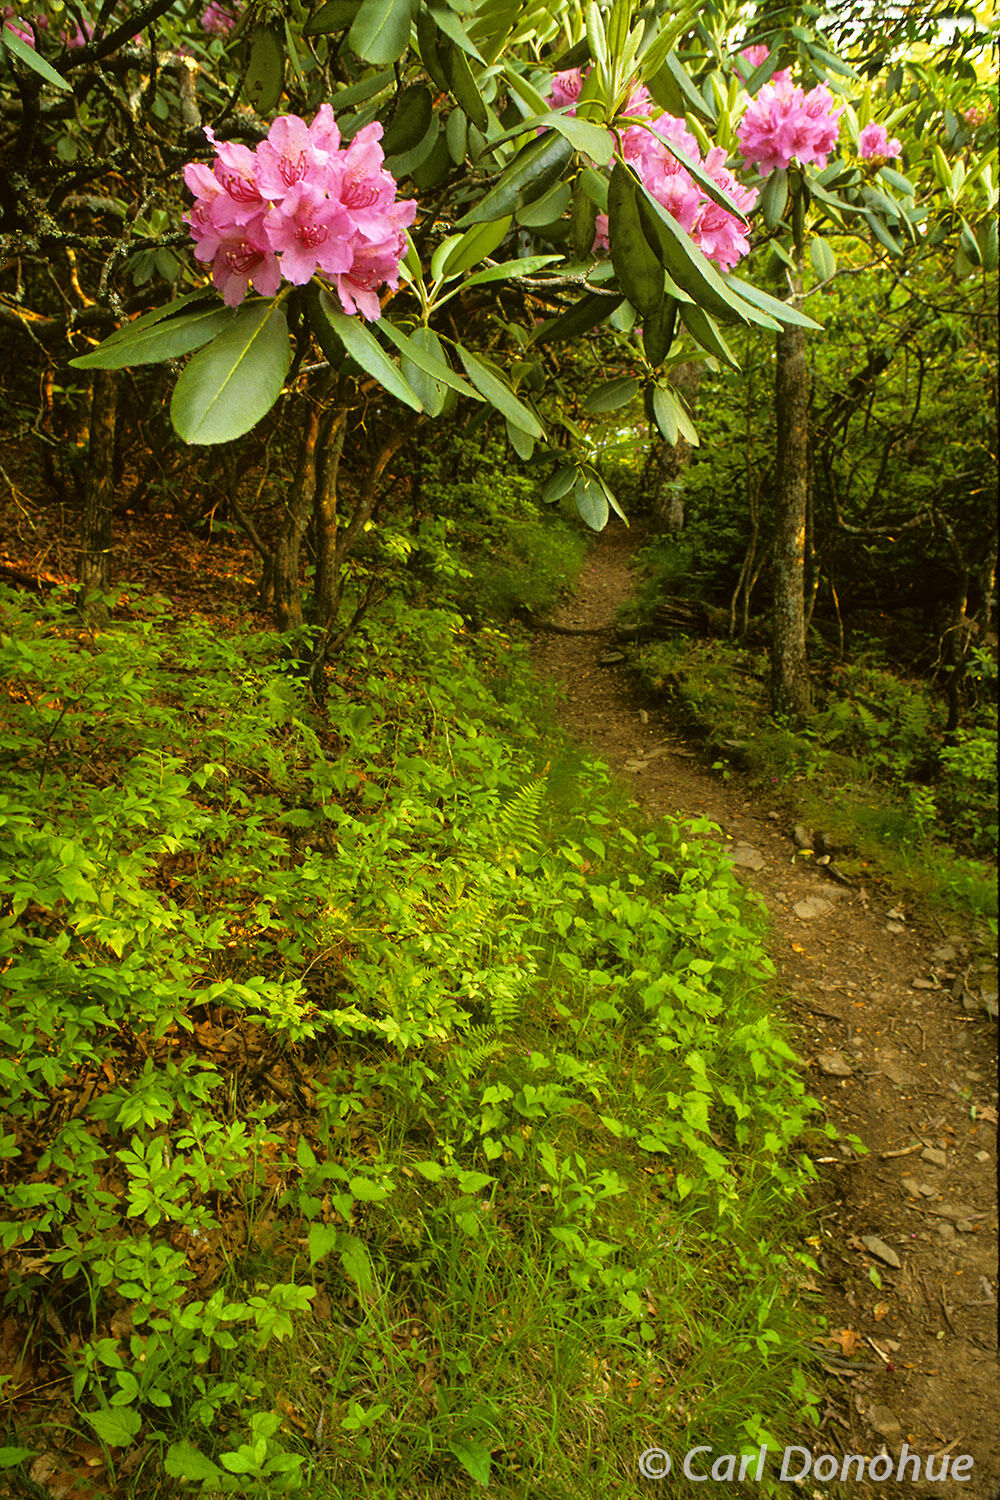 Spring brings a colorful rhododendron bloom, Tray Mountain, along the Appalachian trail, in the North Georgia Mountains.